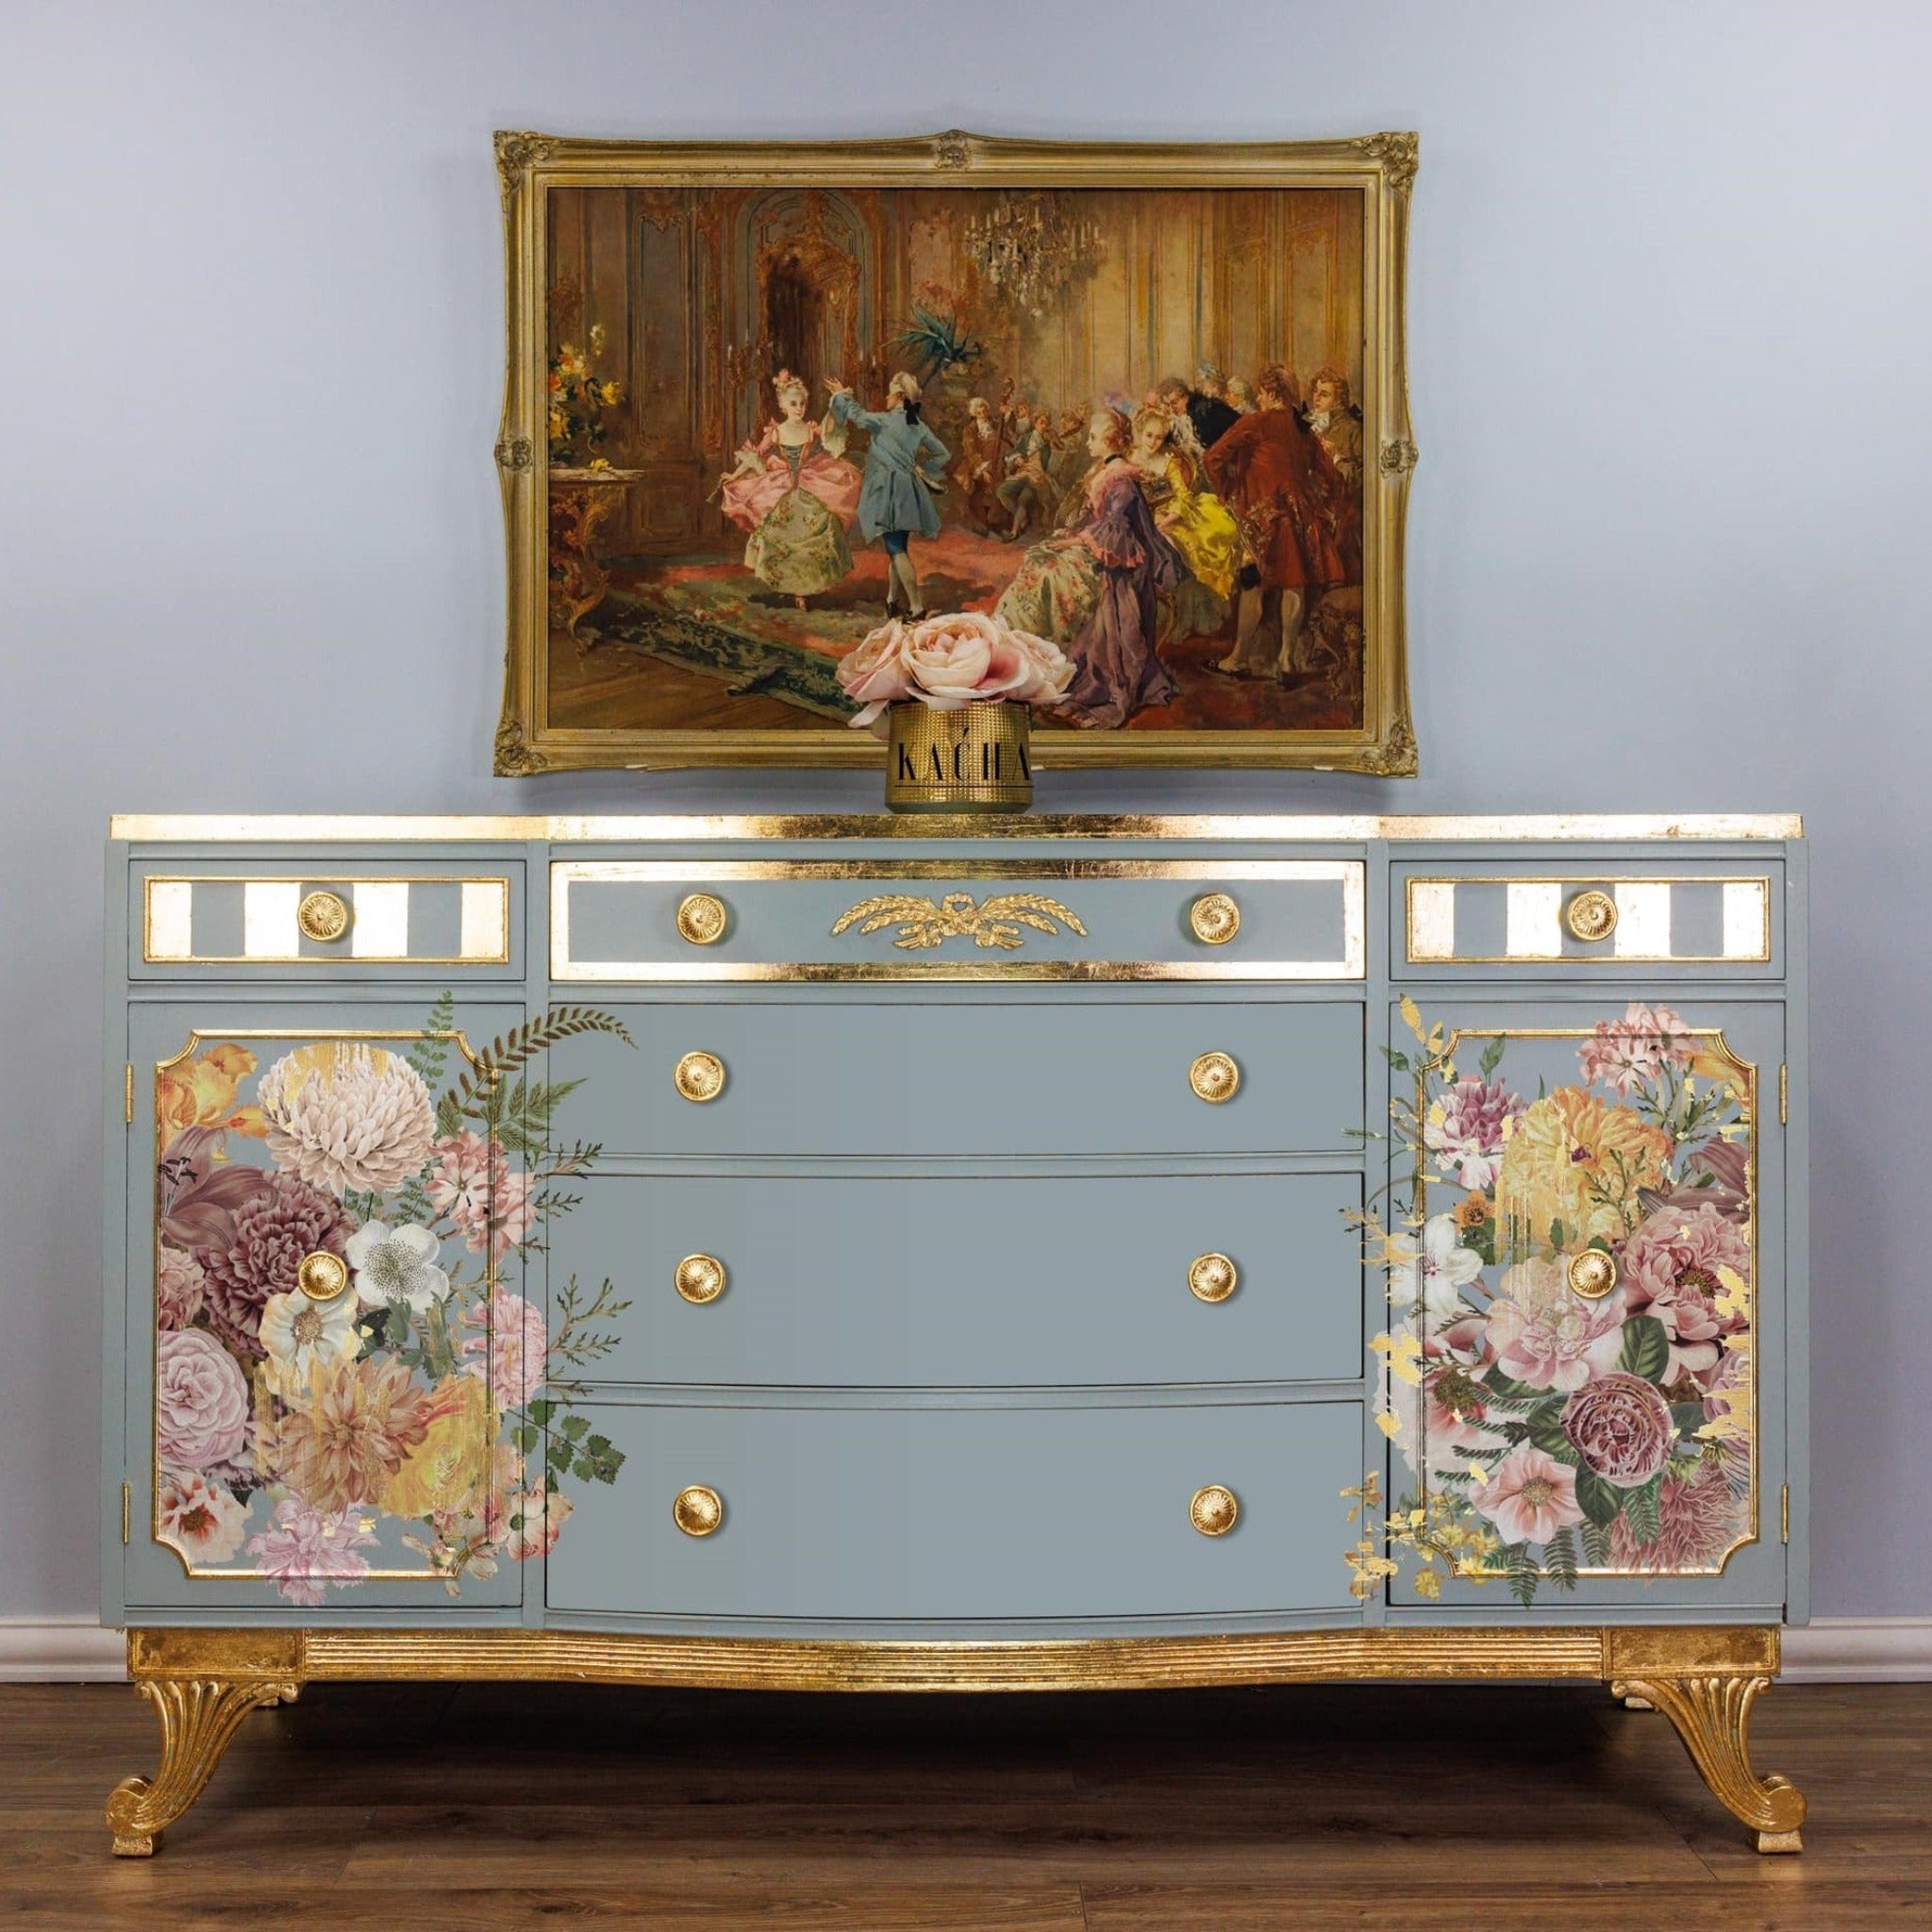 A vintage dresser refurbished by Kacha is painted pale sky blue with gold accents and features ReDesign with Prima's Kacha Woodland Floral transfer on its left and right doors.